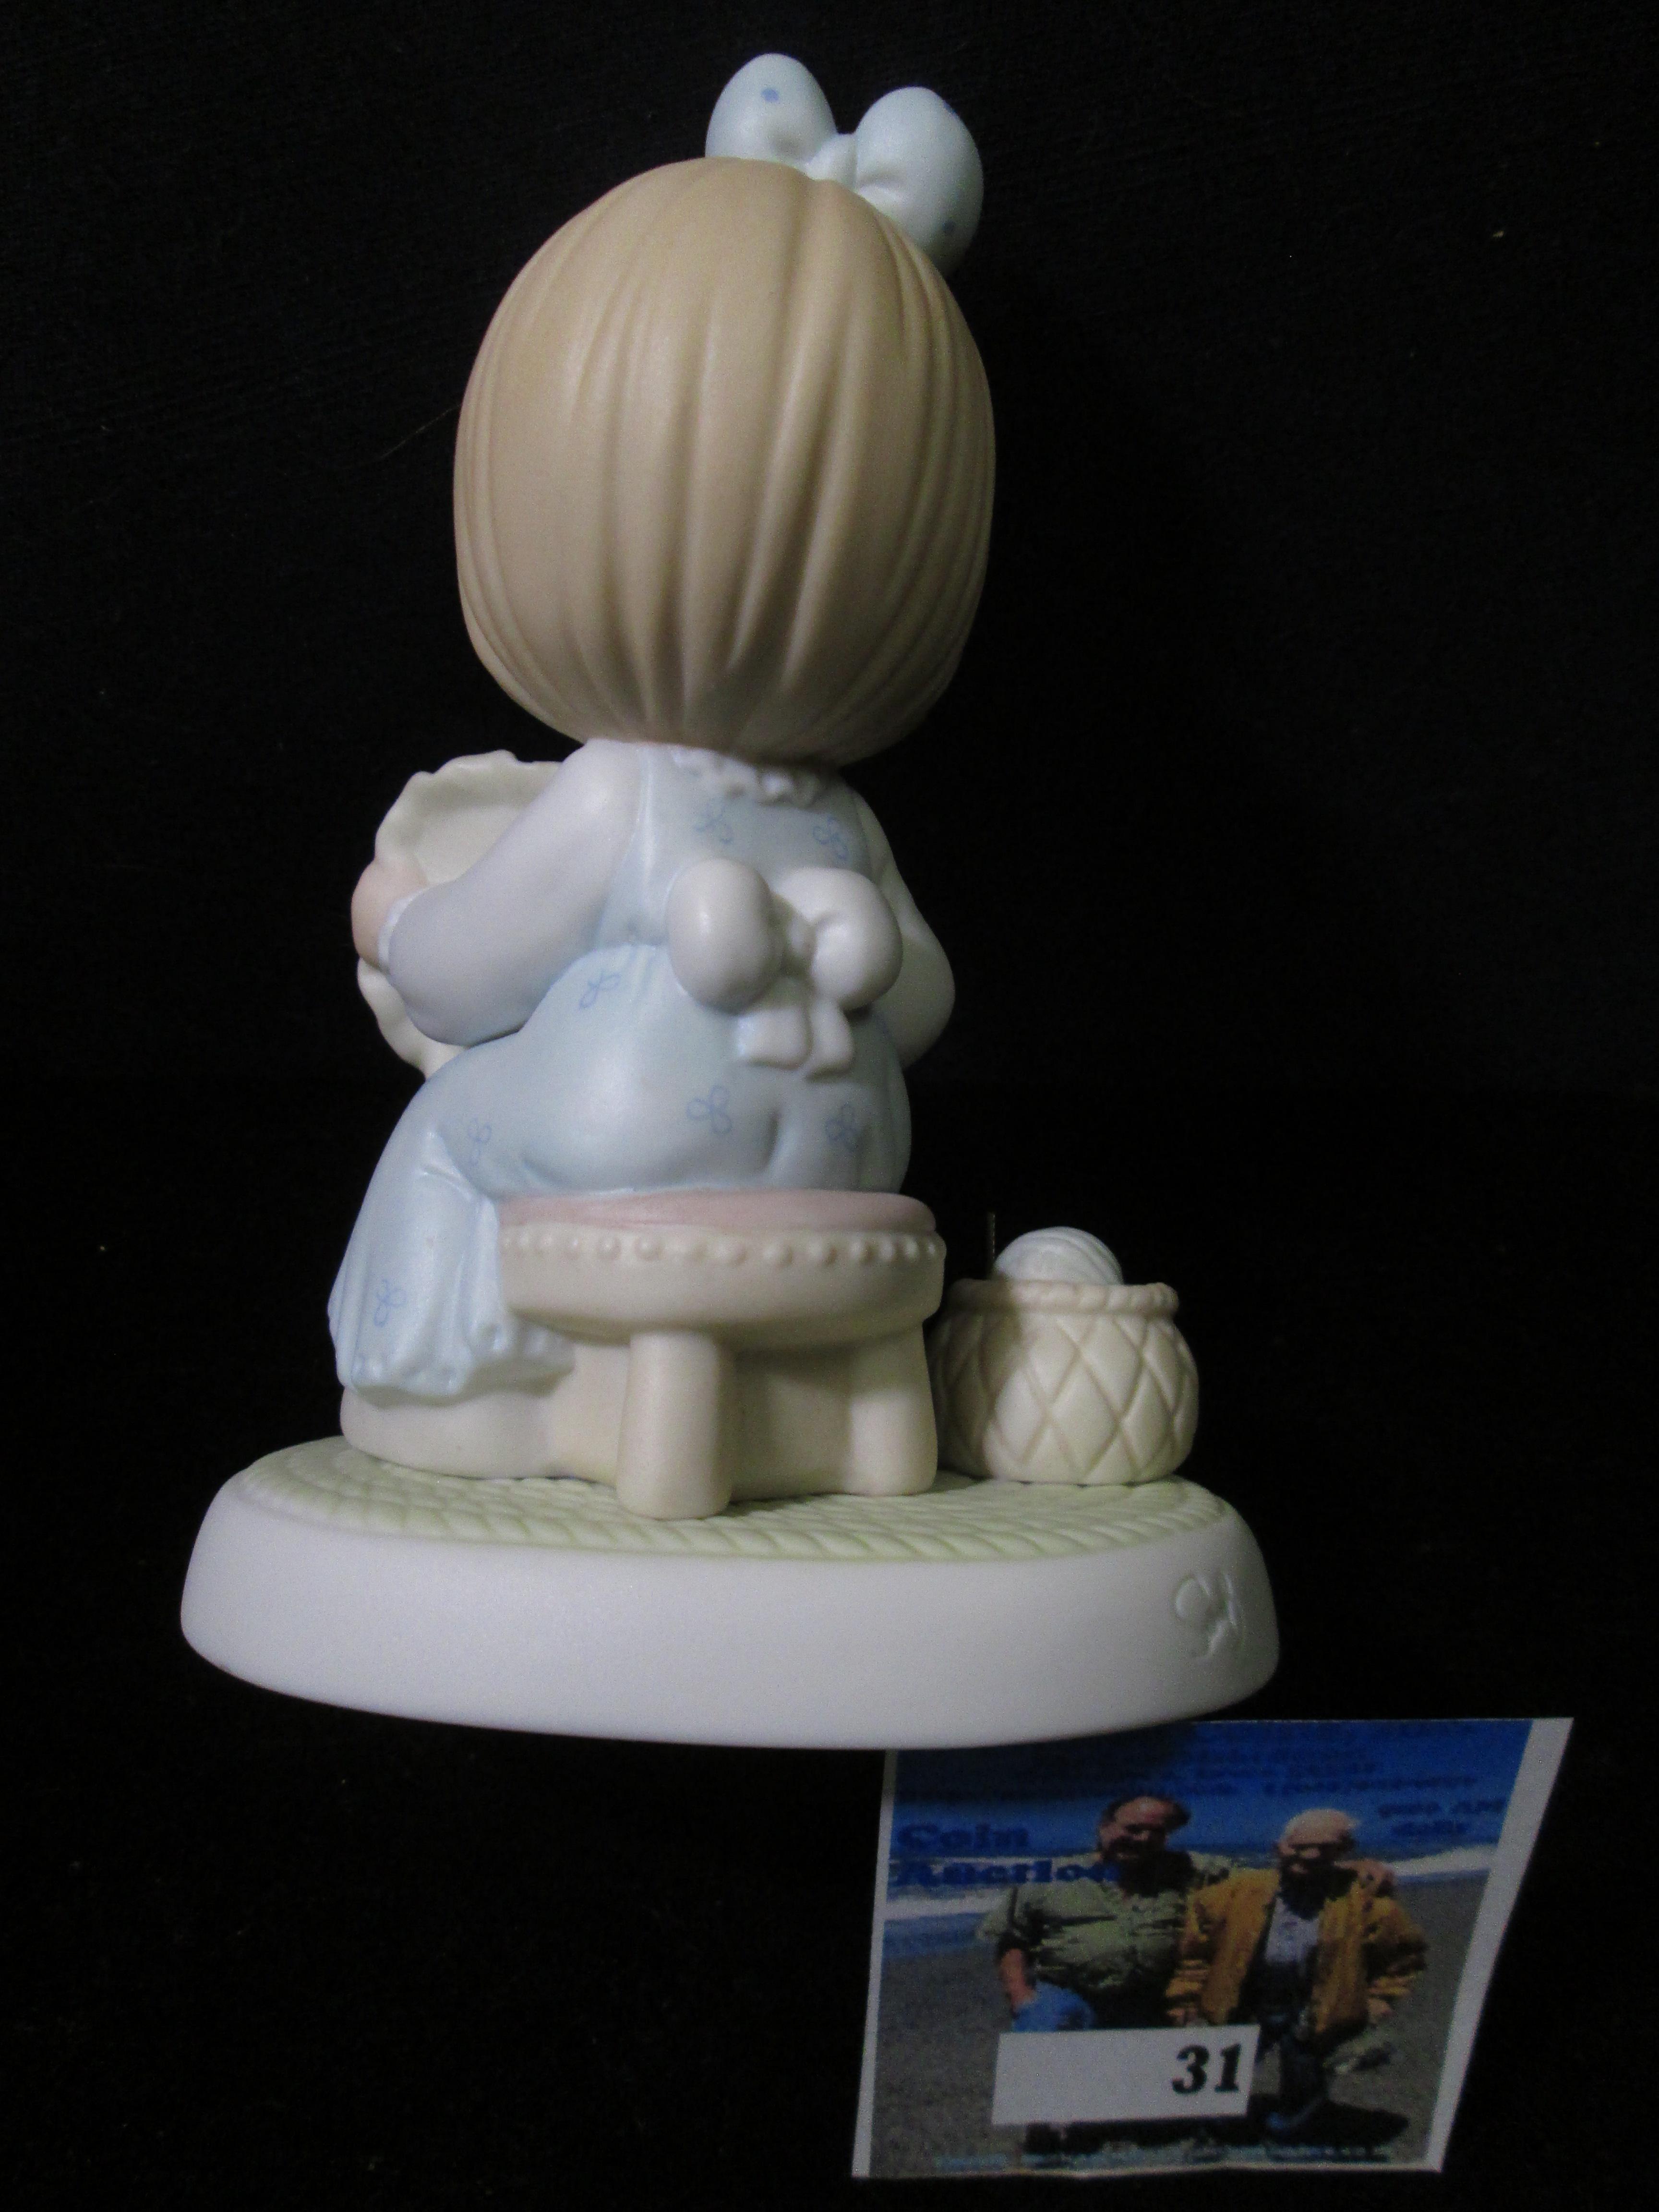 1993 "Precious Moments The Lord is Counting on You" Porcelain Figurine, #531707.